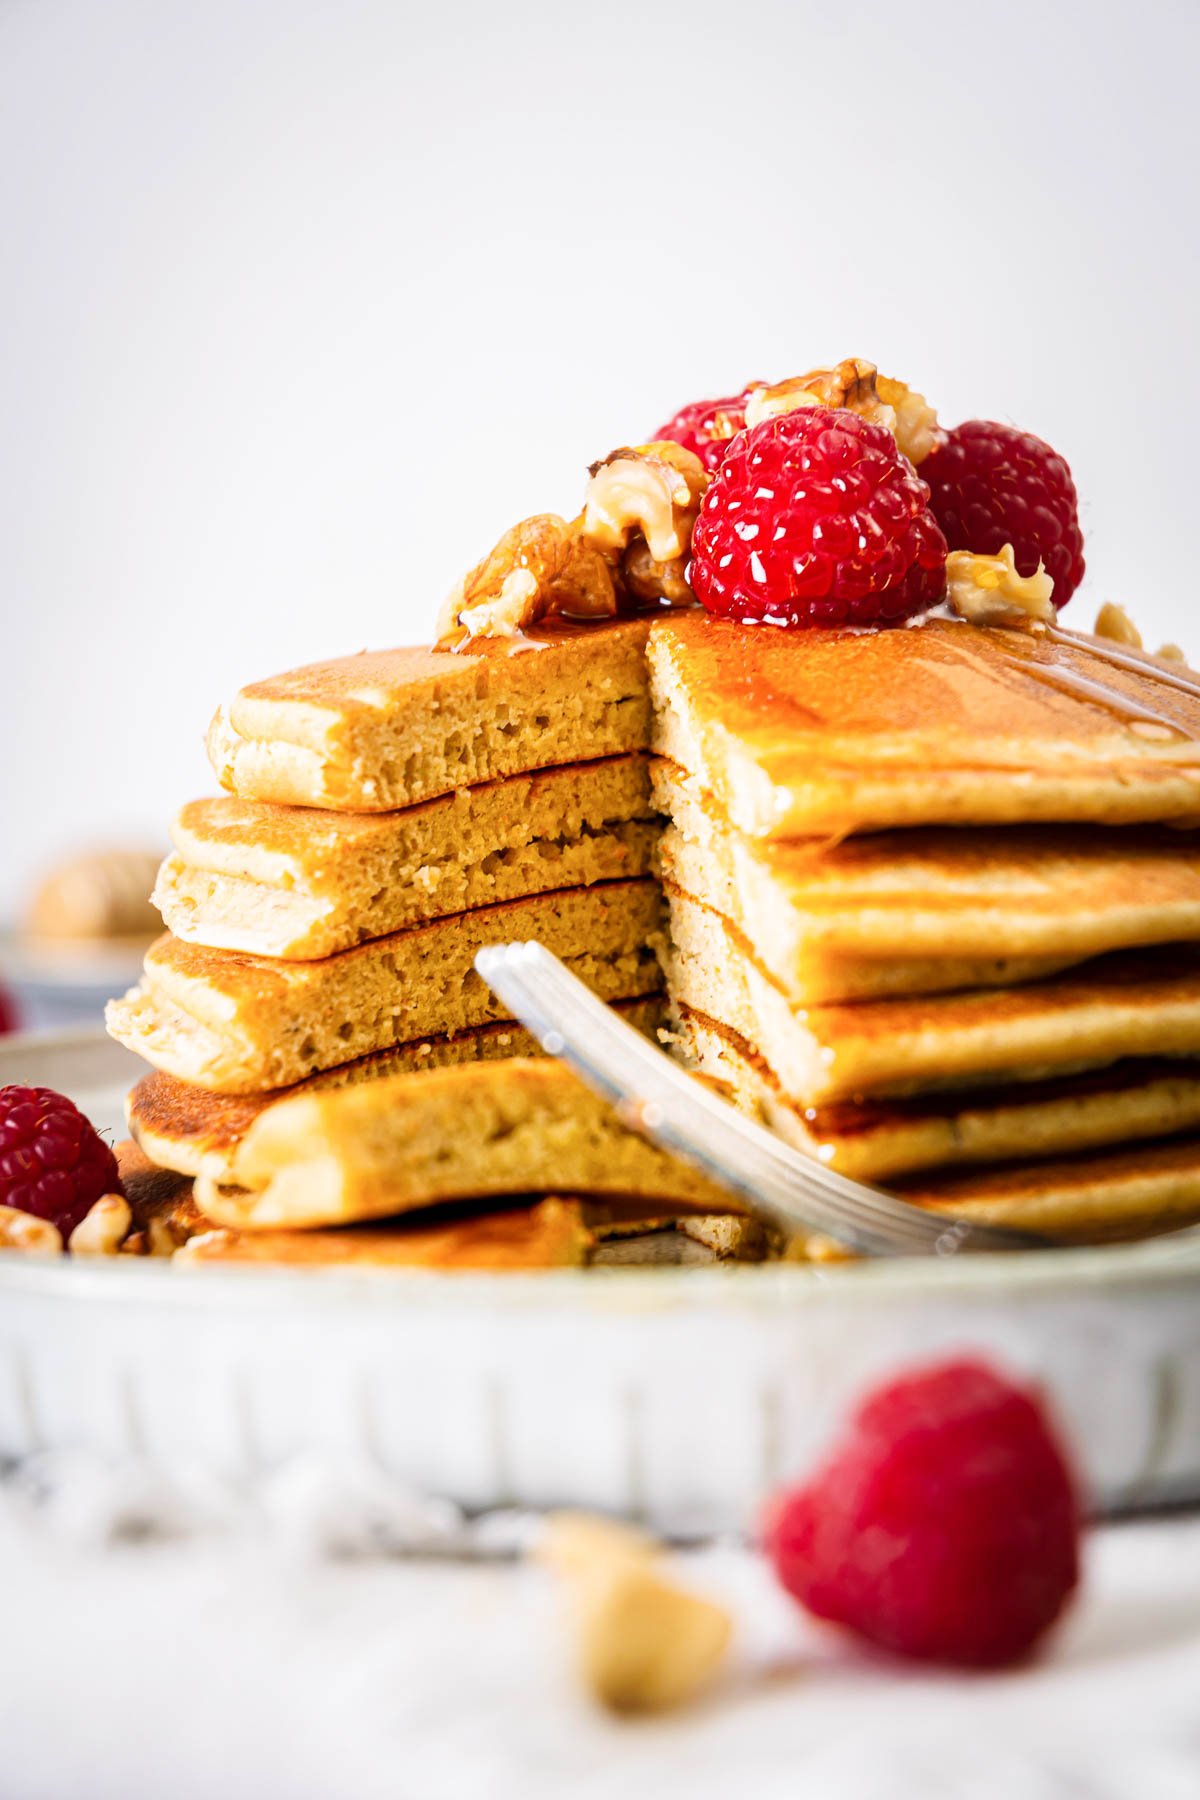 Banana protein pancakes stacked, topped with raspberries, and sliced into on a plate.